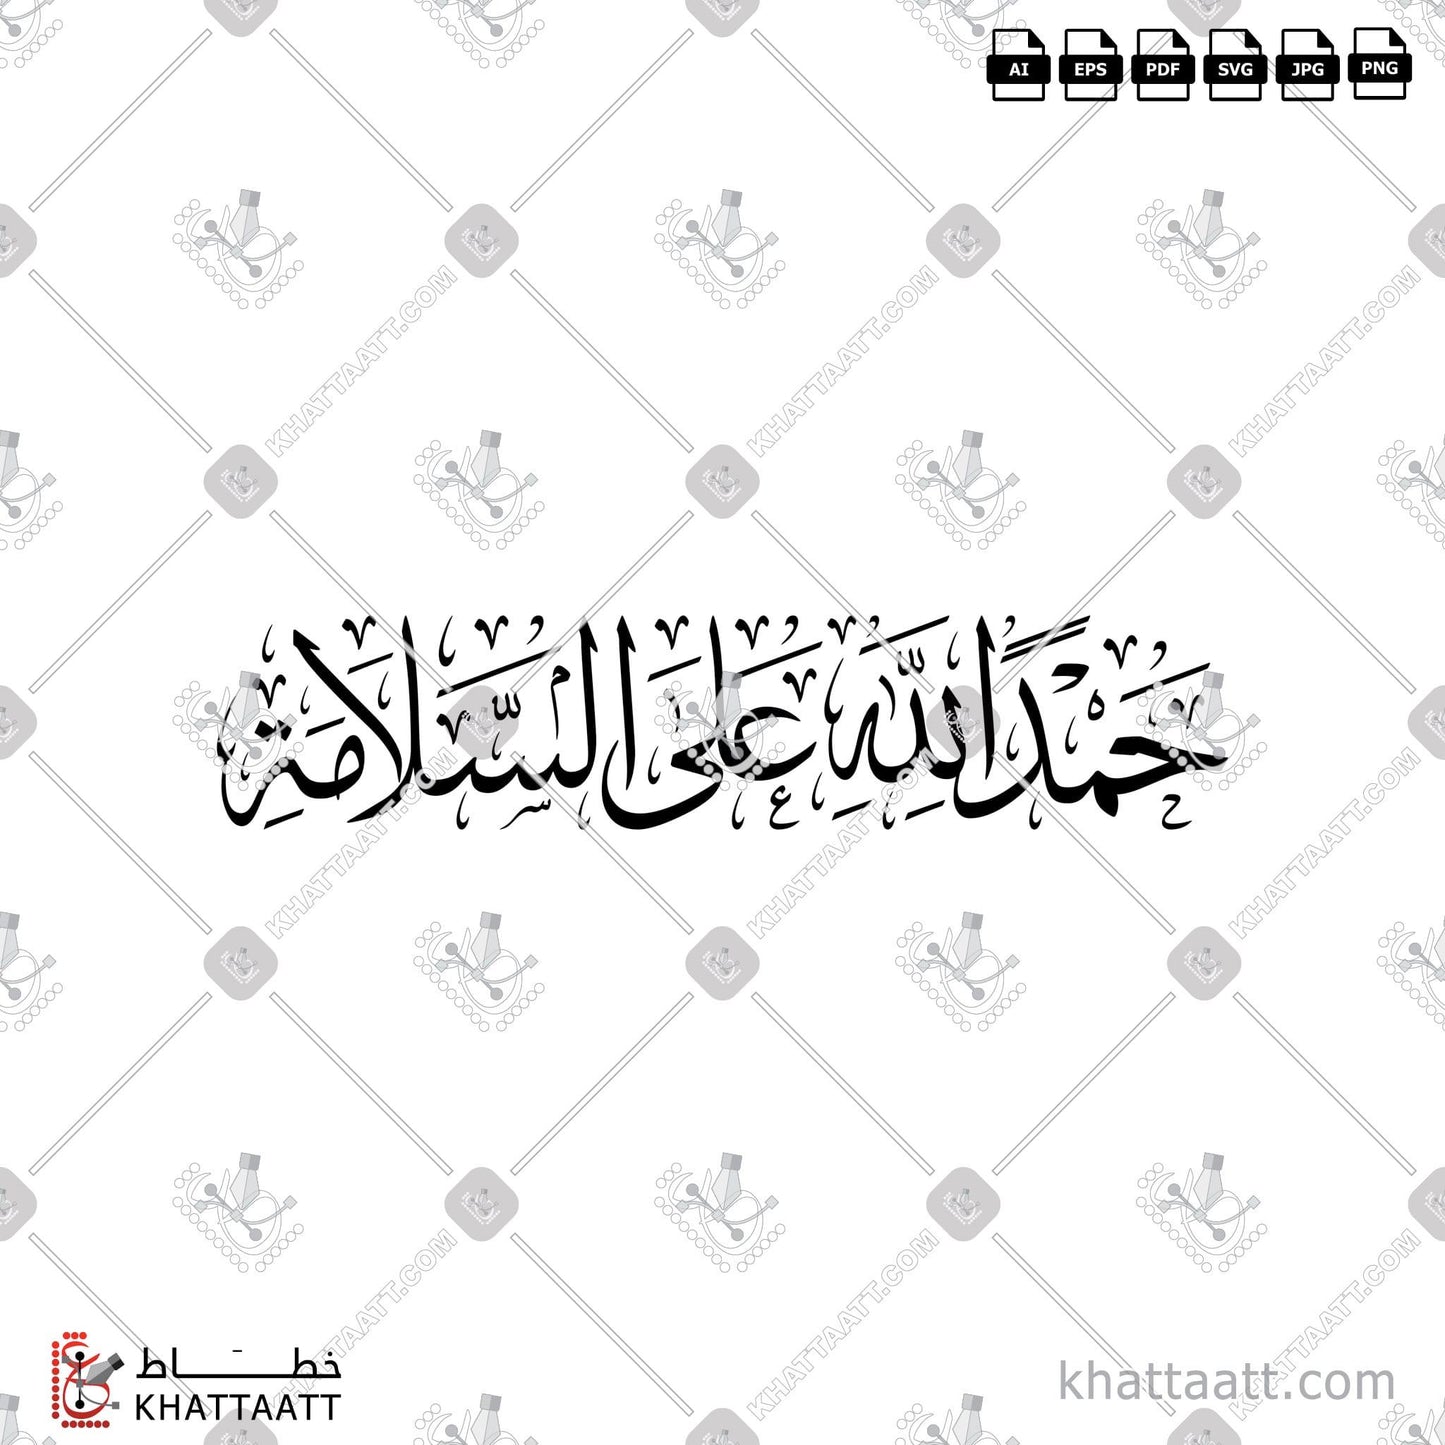 Download Arabic Calligraphy of حمدًا لله على السلامة in Thuluth - خط الثلث in vector and .png